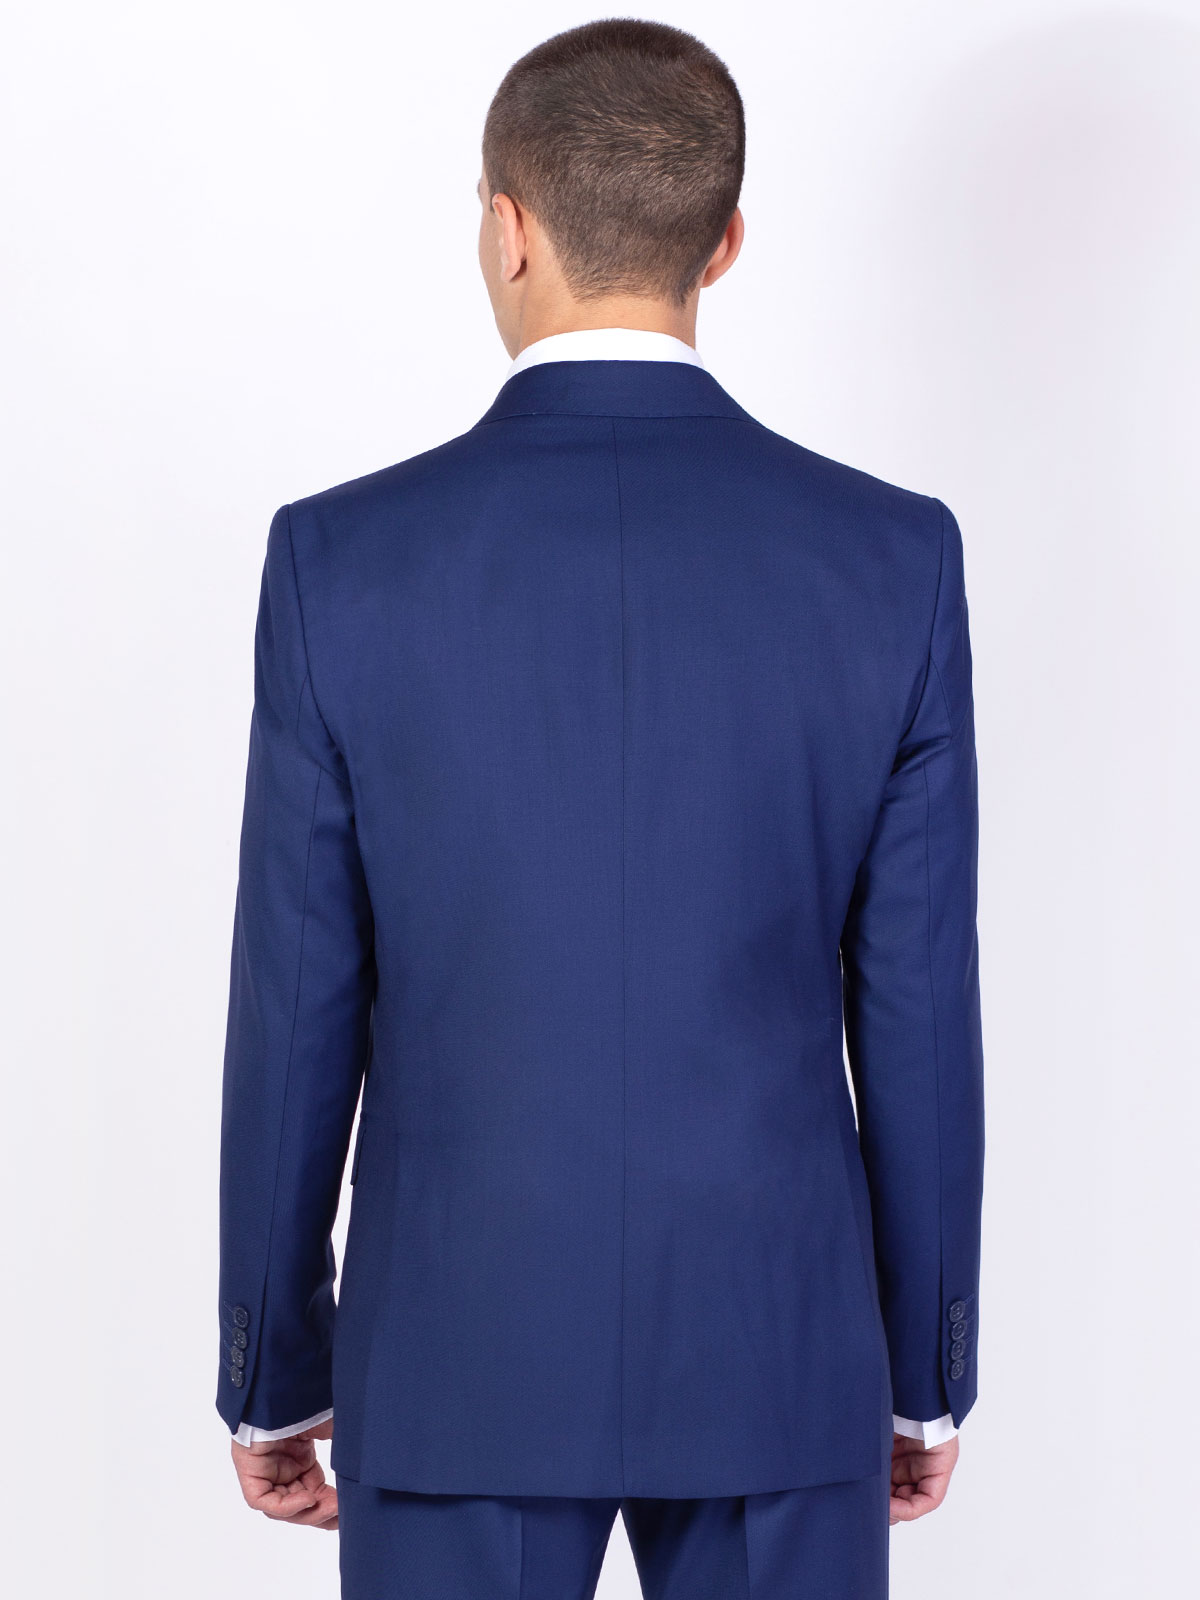 Classic jacket in blue - 64117 € 138.36 img4